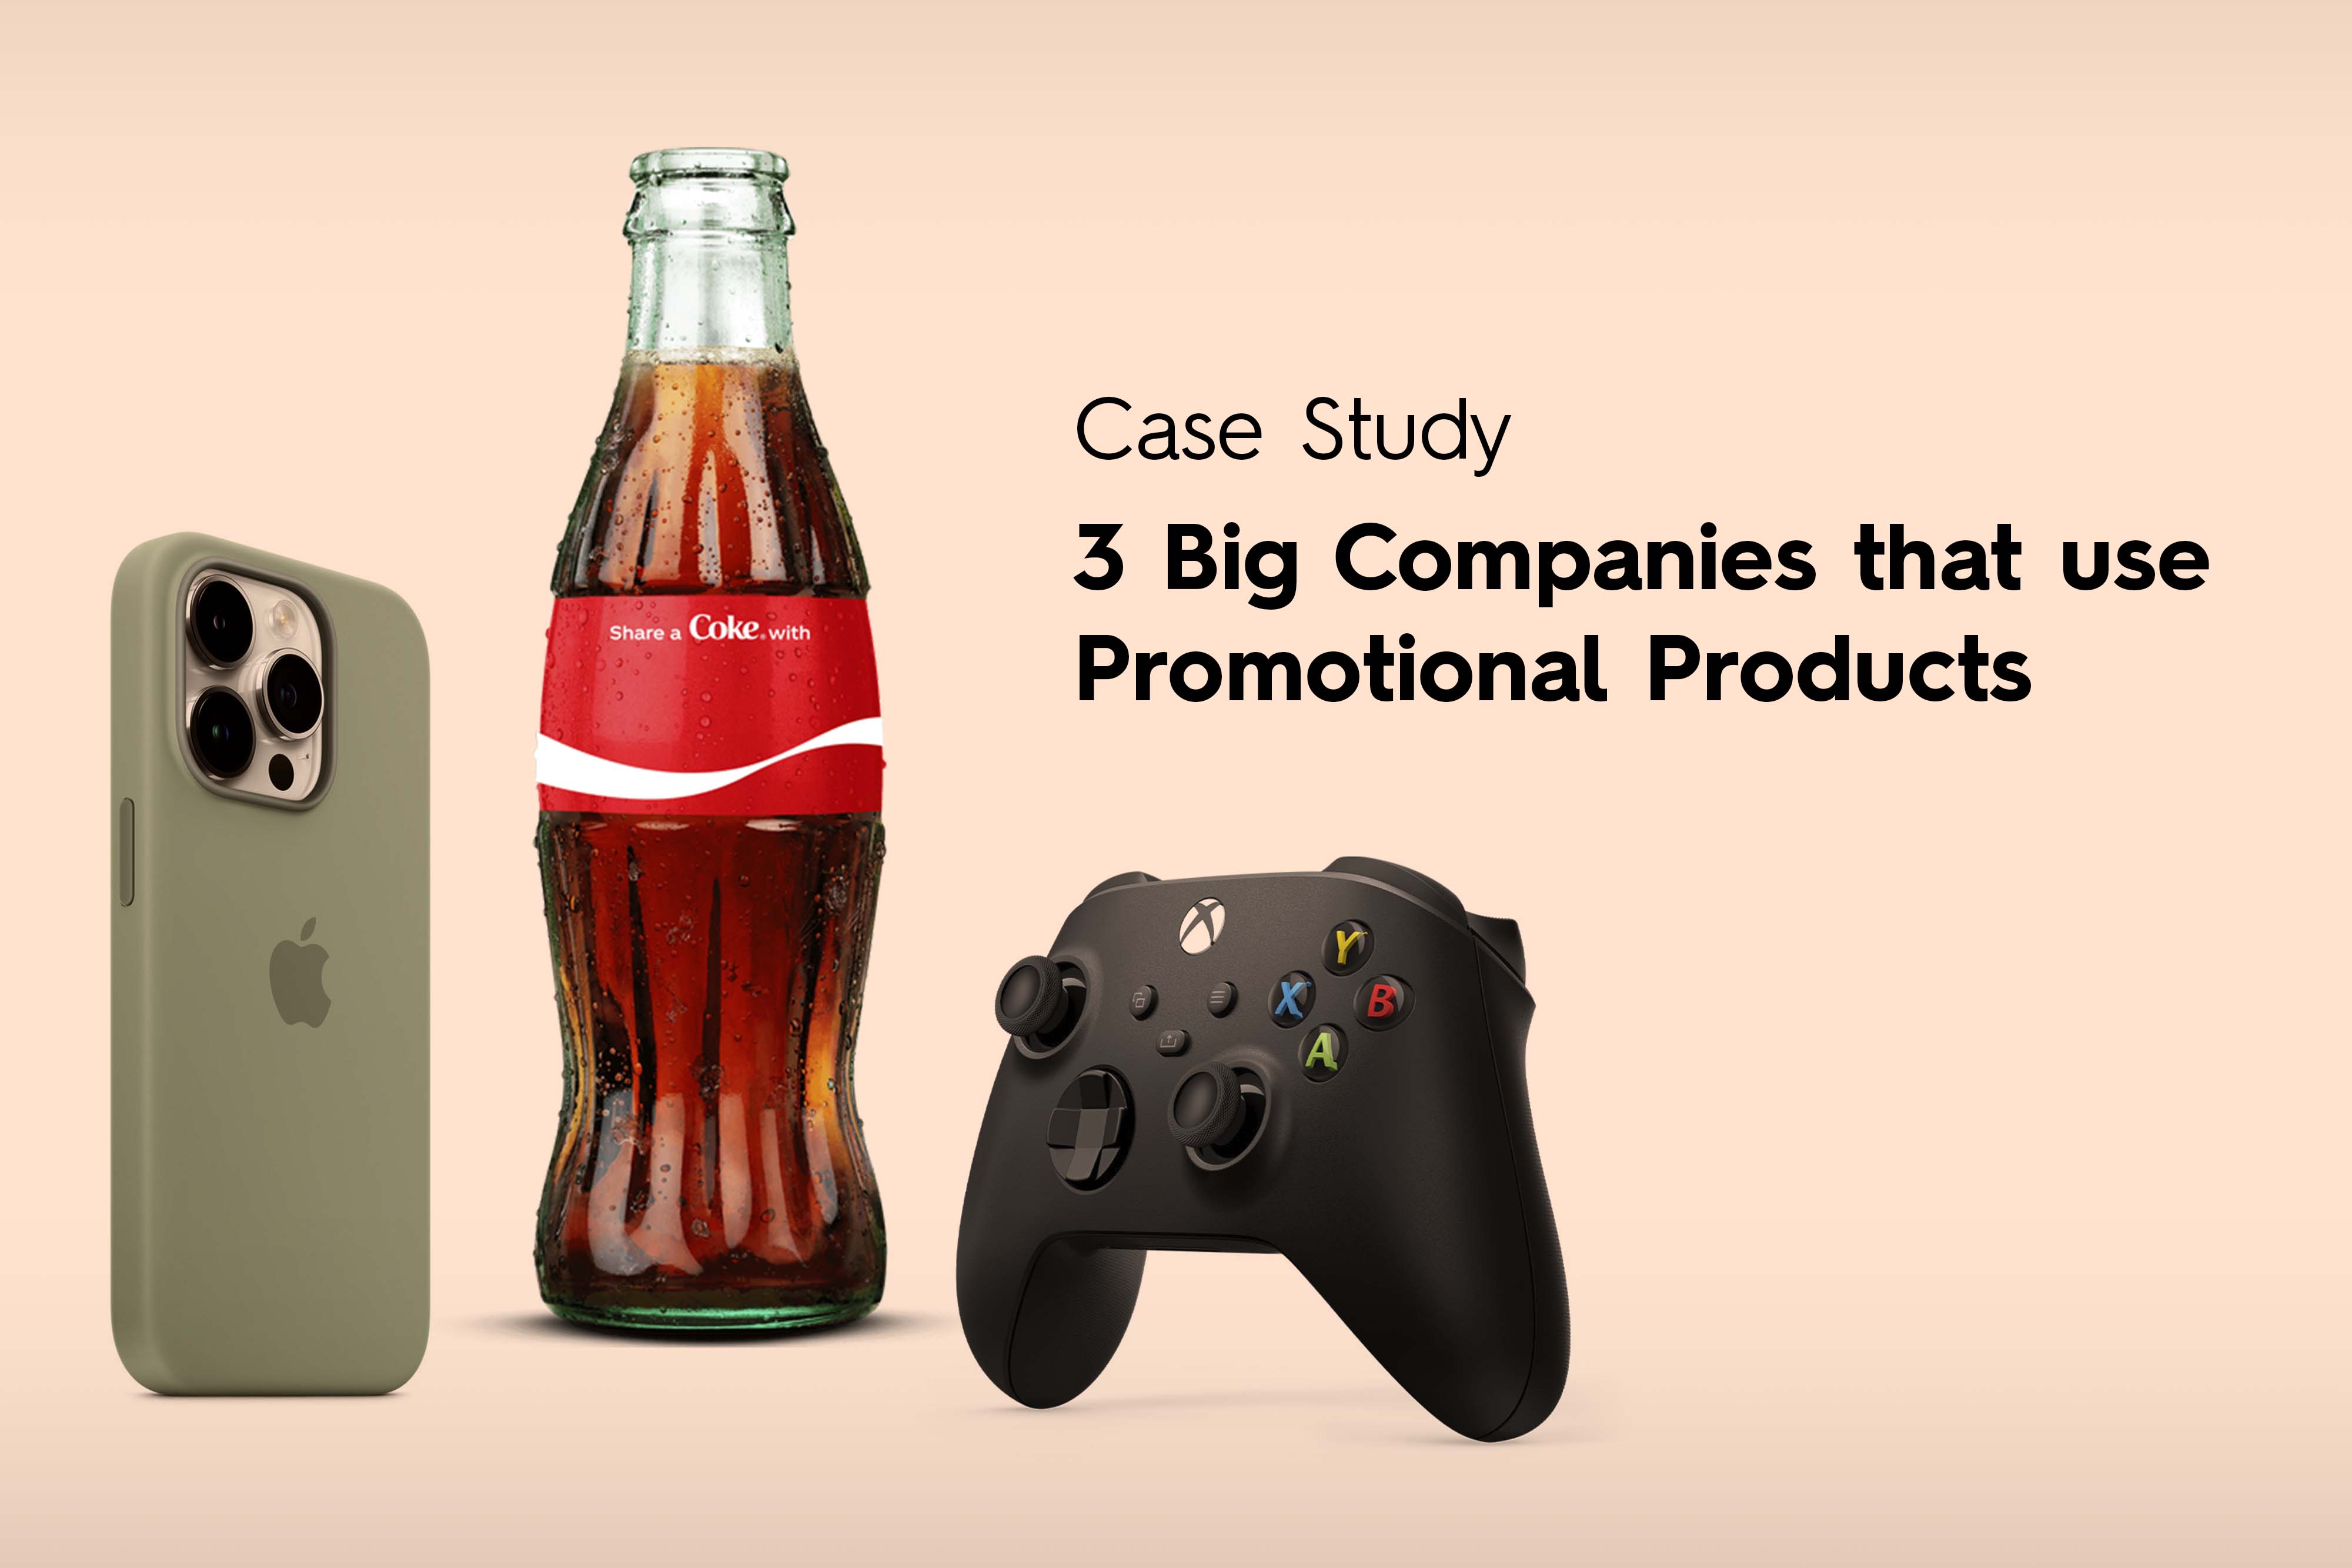 Case-Study-Three-Big-Companies-Promotional-Products